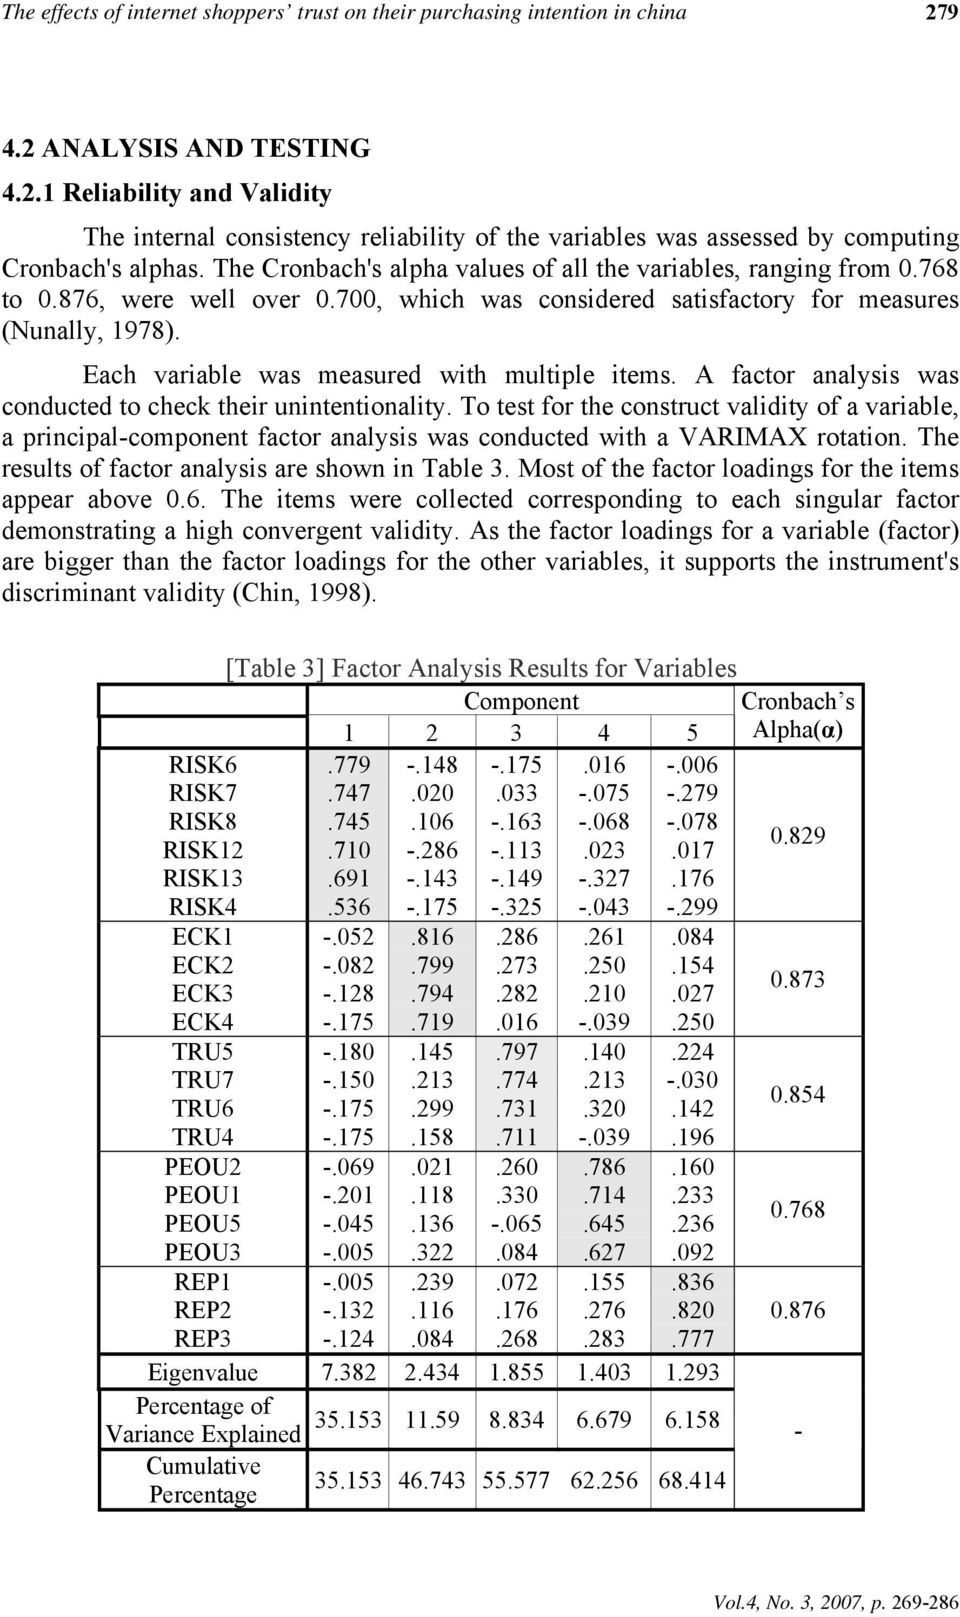 The Cronbach's alpha values of all the variables, ranging from 0.768 to 0.876, were well over 0.700, which was considered satisfactory for measures (Nunally, 1978).